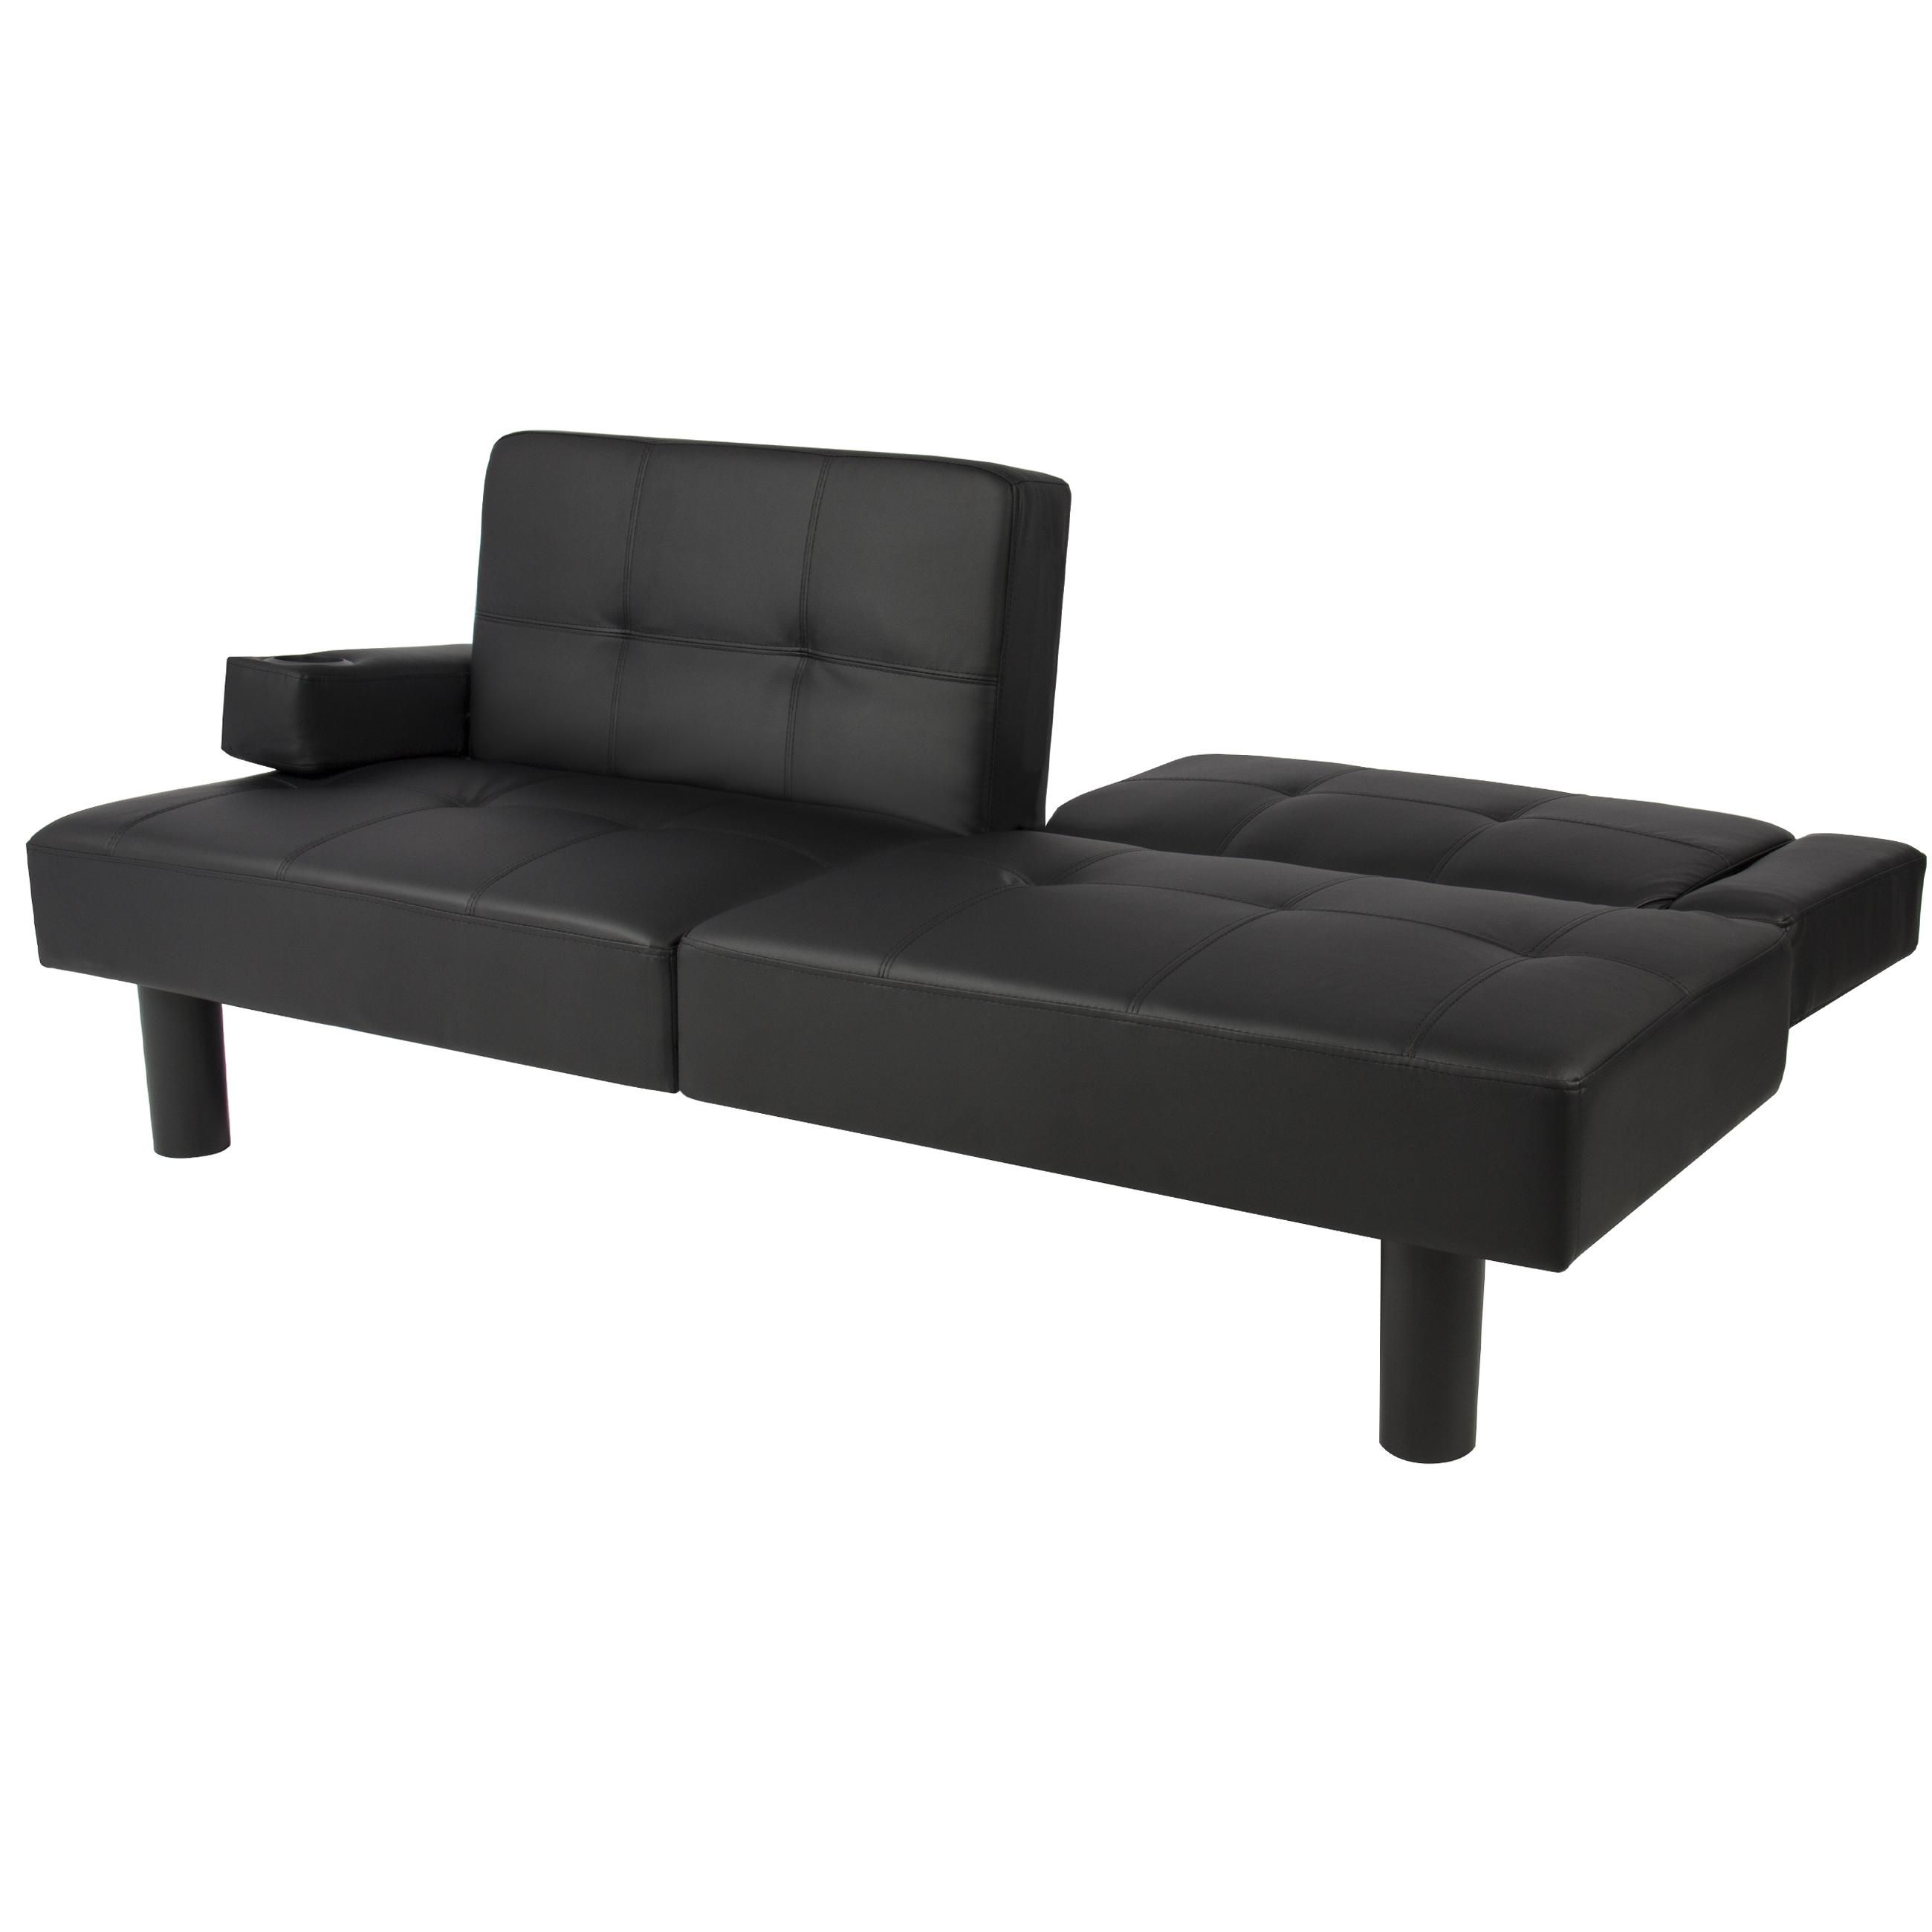 Leather Faux Fold Down Futon Sofa Bed Couch Sleeper Furniture Within Small Black Futon Sofa Beds (View 16 of 20)